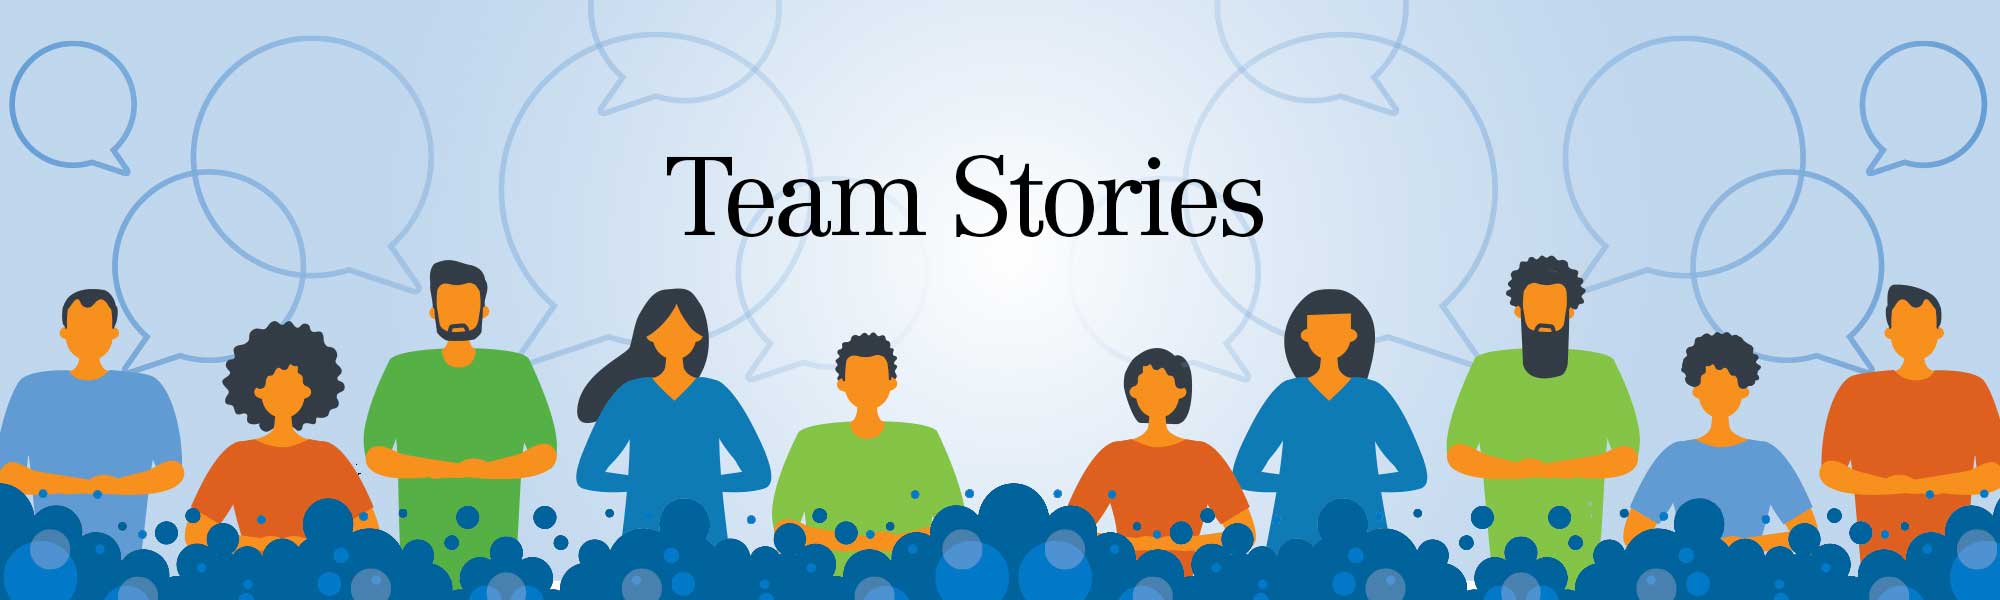 Team stories featuring graphics of animated people standing in a line behind bubbles blue